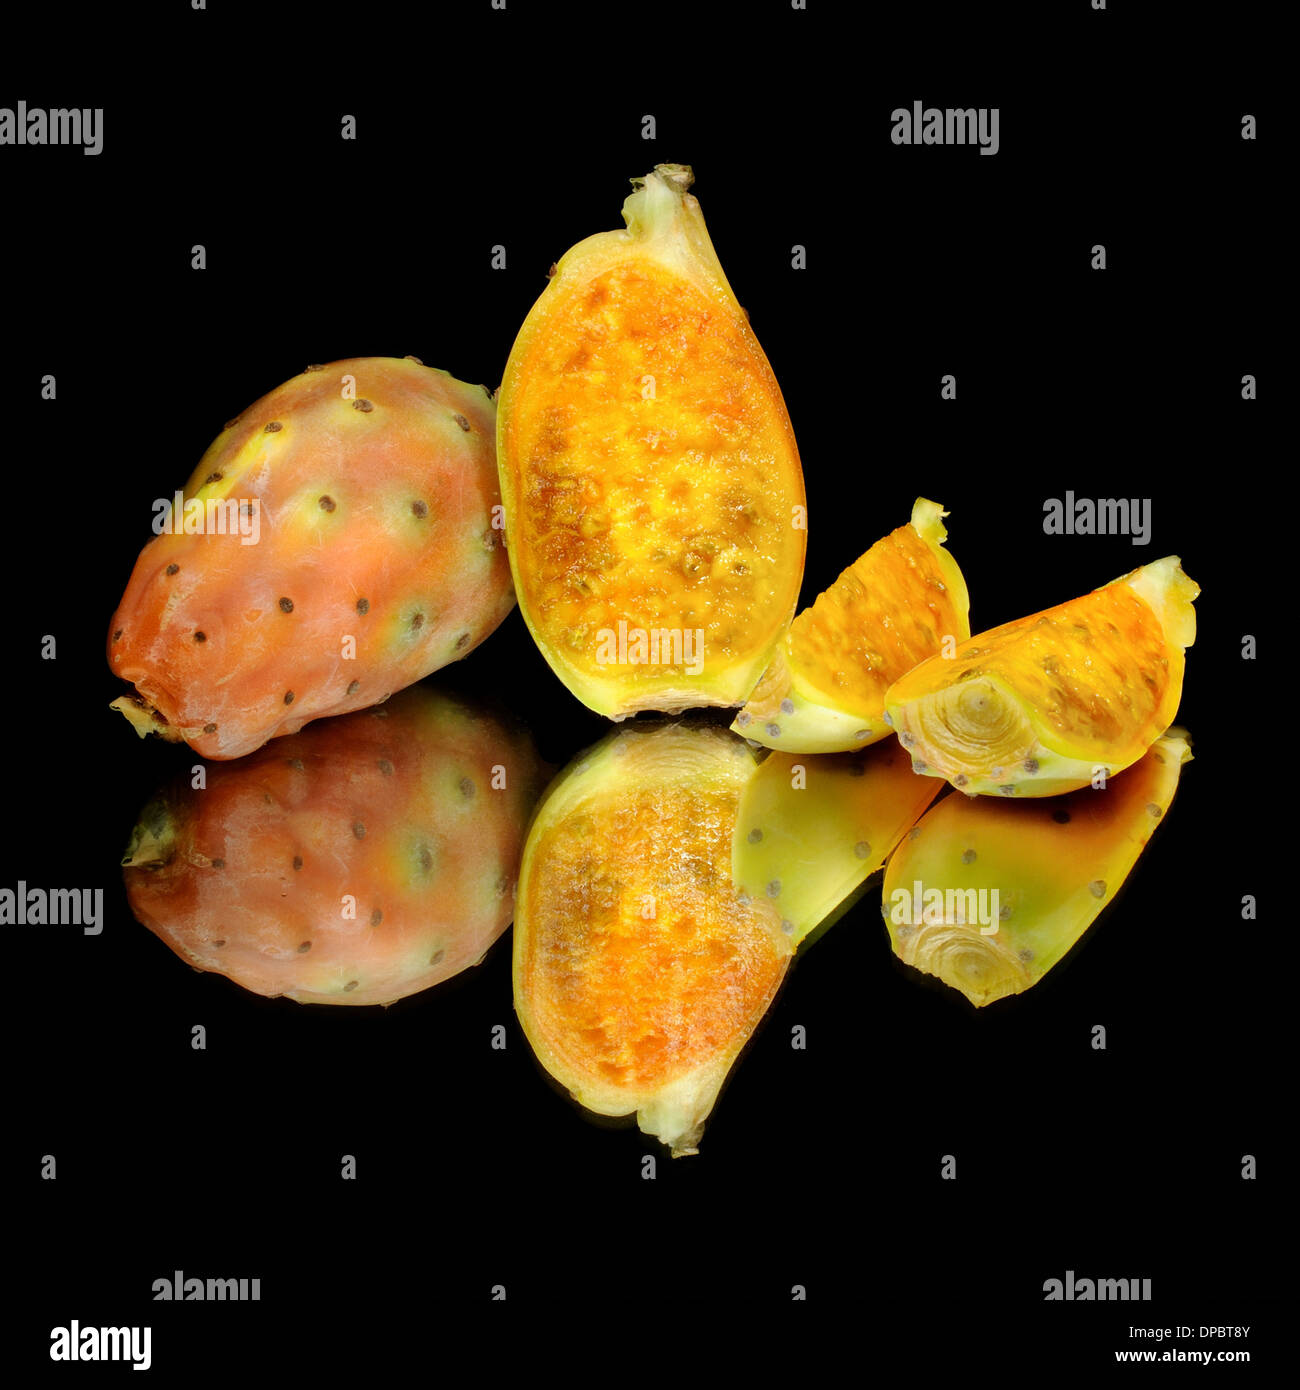 Prickly pears on mirror with black background. Fruit. Stock Photo